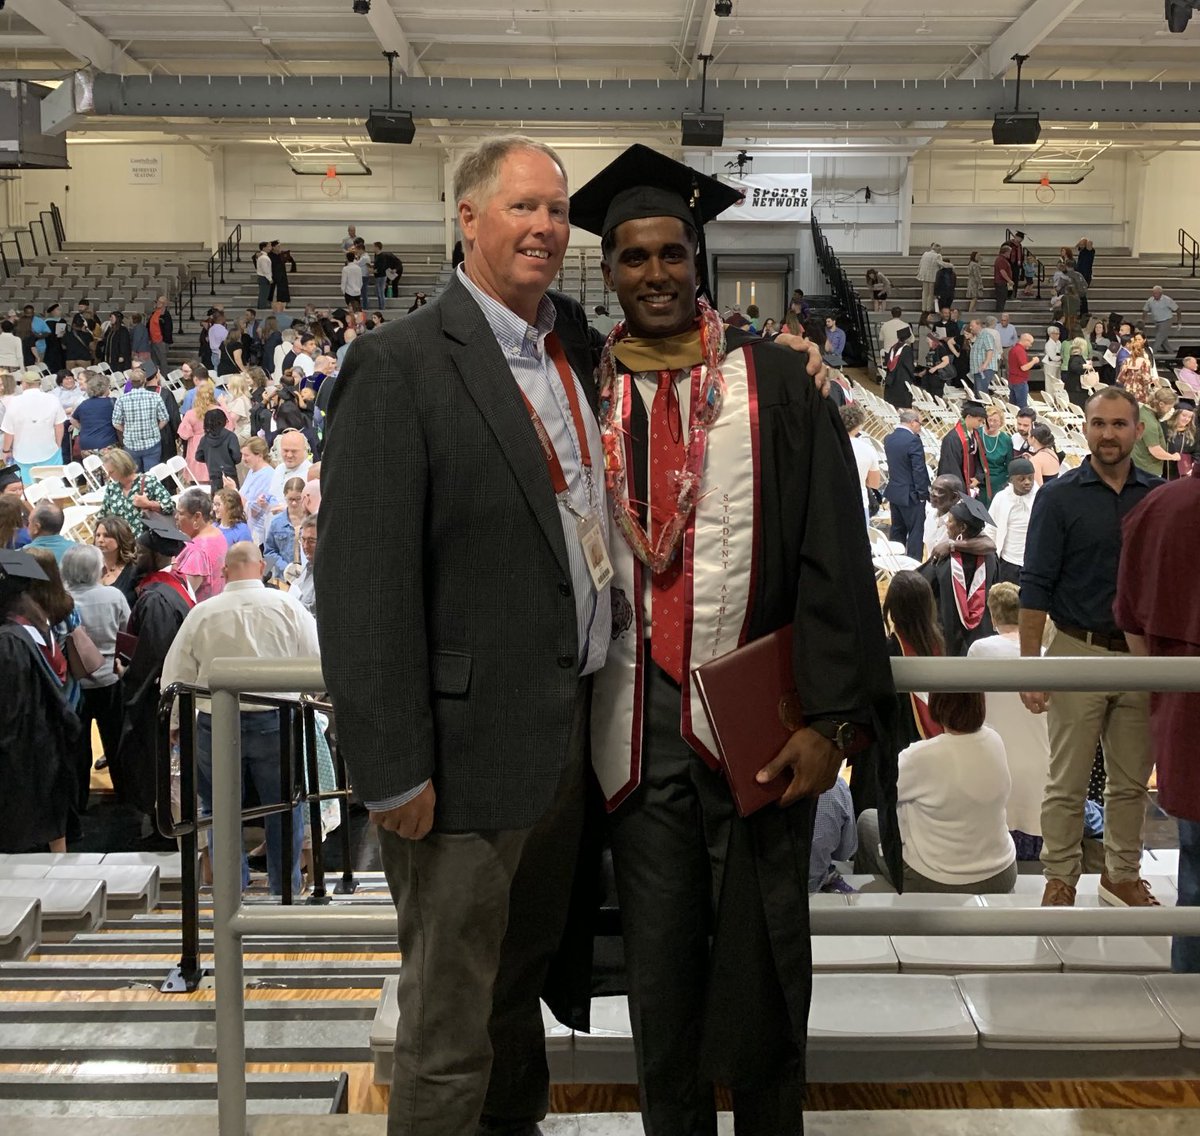 So proud of Kevin Latchayya - Graduating with his master’s degree! Very instrumental in the classroom and our success on the golf course for our team! Go Cu Golf!TigerUp